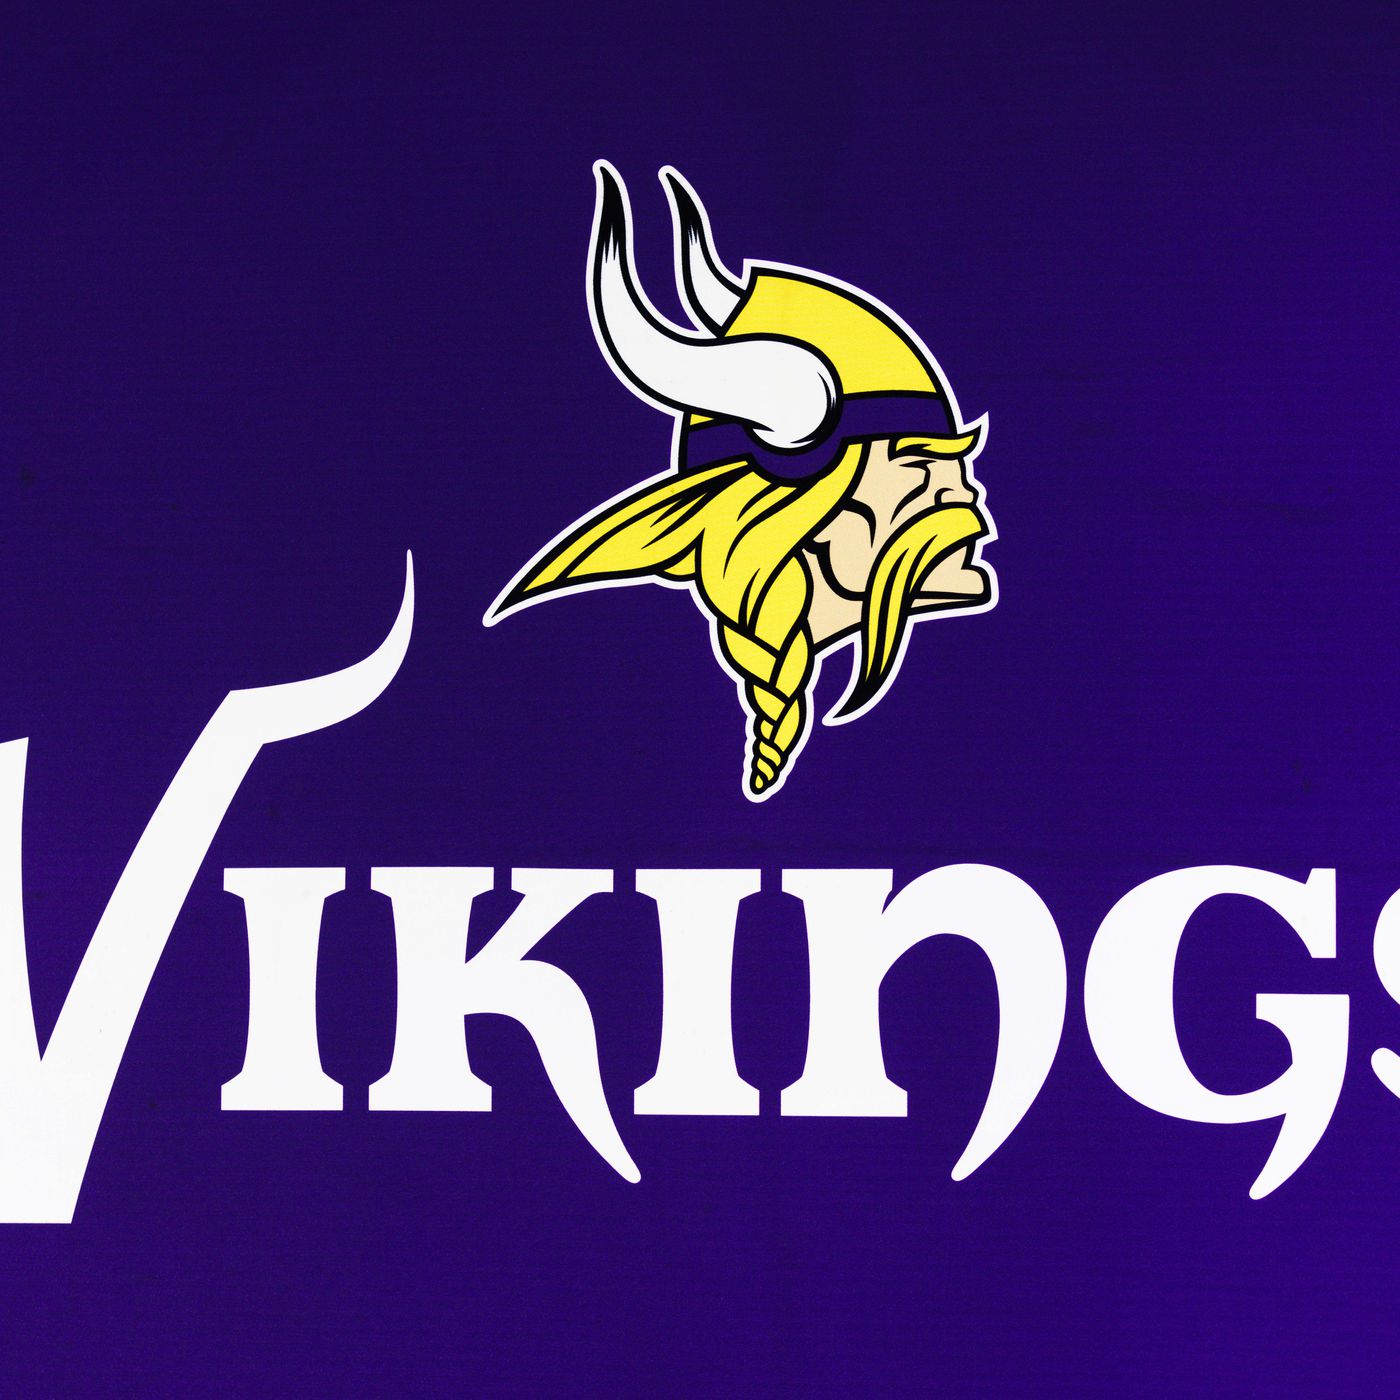 Your 2022 Minnesota Vikings Schedule - Daily Norseman